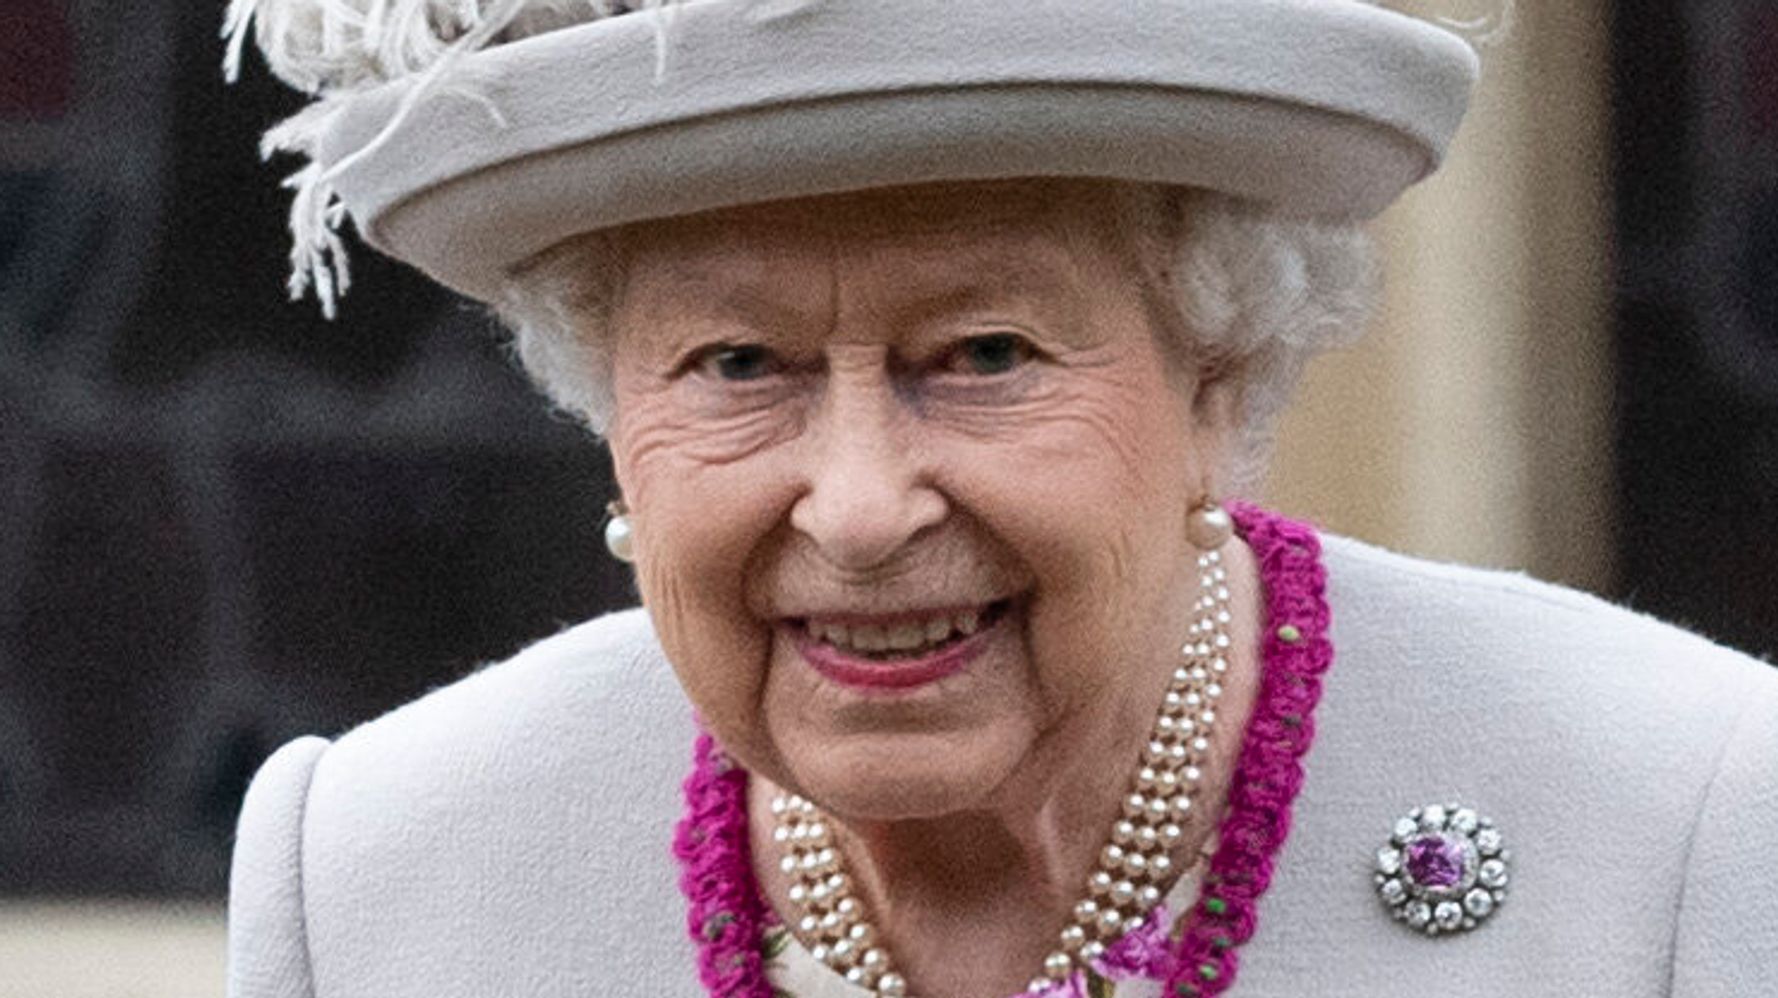 Sex Toy Company Receives Award From Queen For ‘Outstanding Continuous Growth’